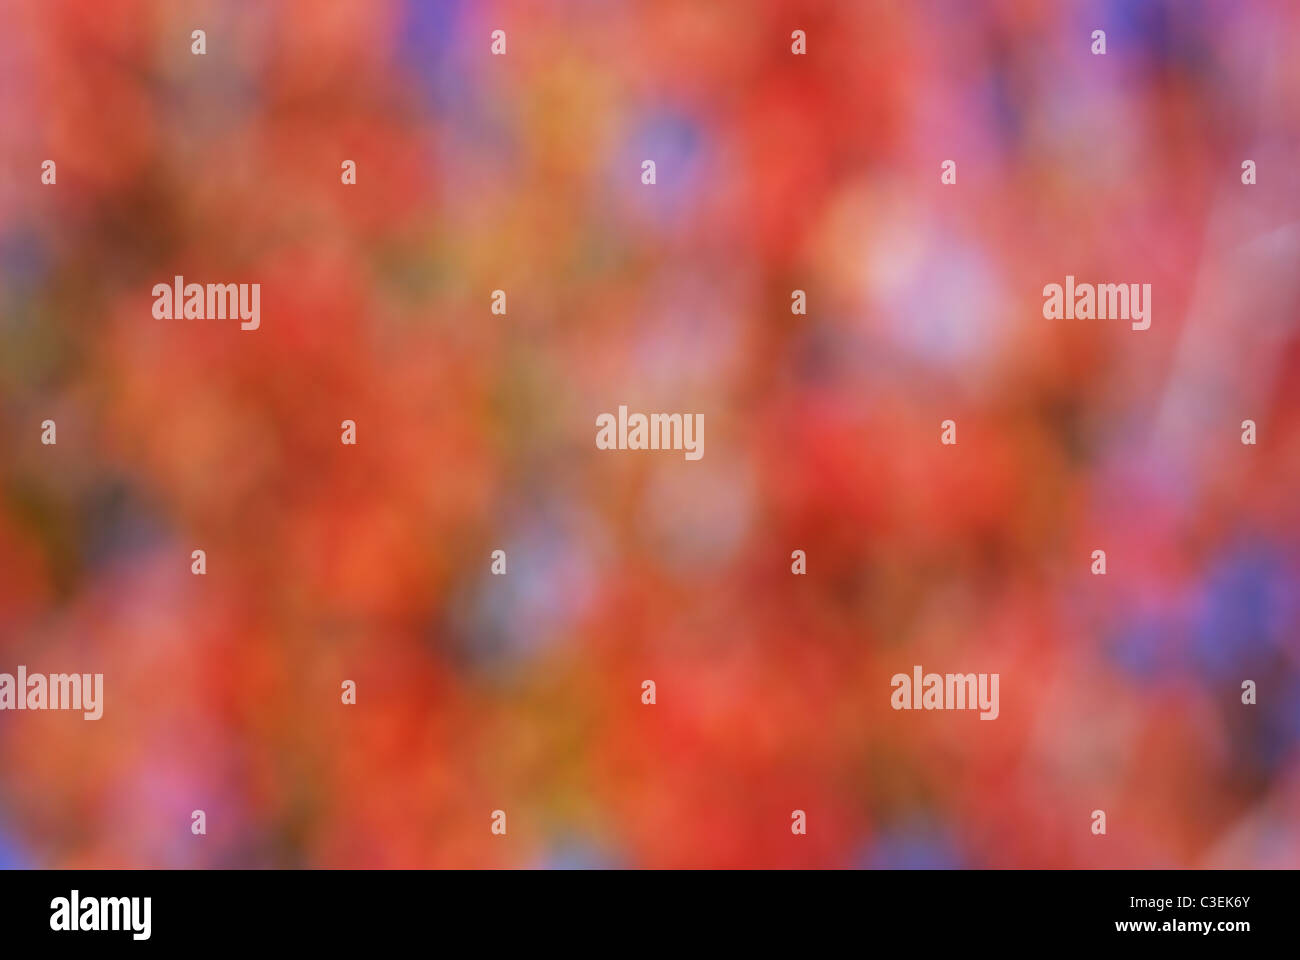 Abstract blurred red and blue tone background Stock Photo